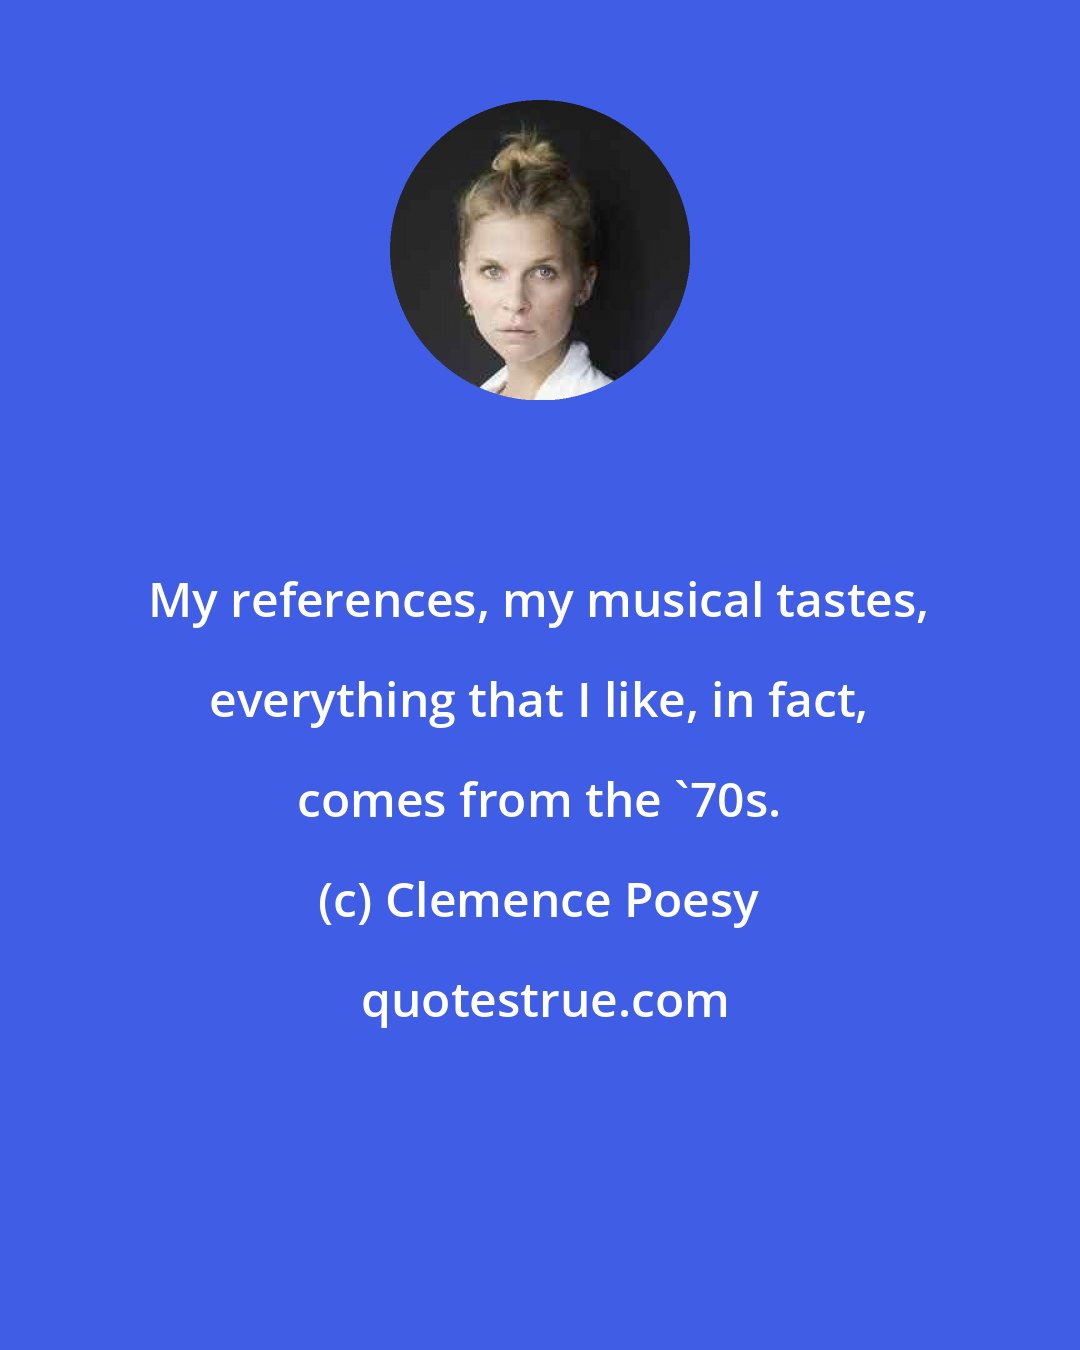 Clemence Poesy: My references, my musical tastes, everything that I like, in fact, comes from the '70s.